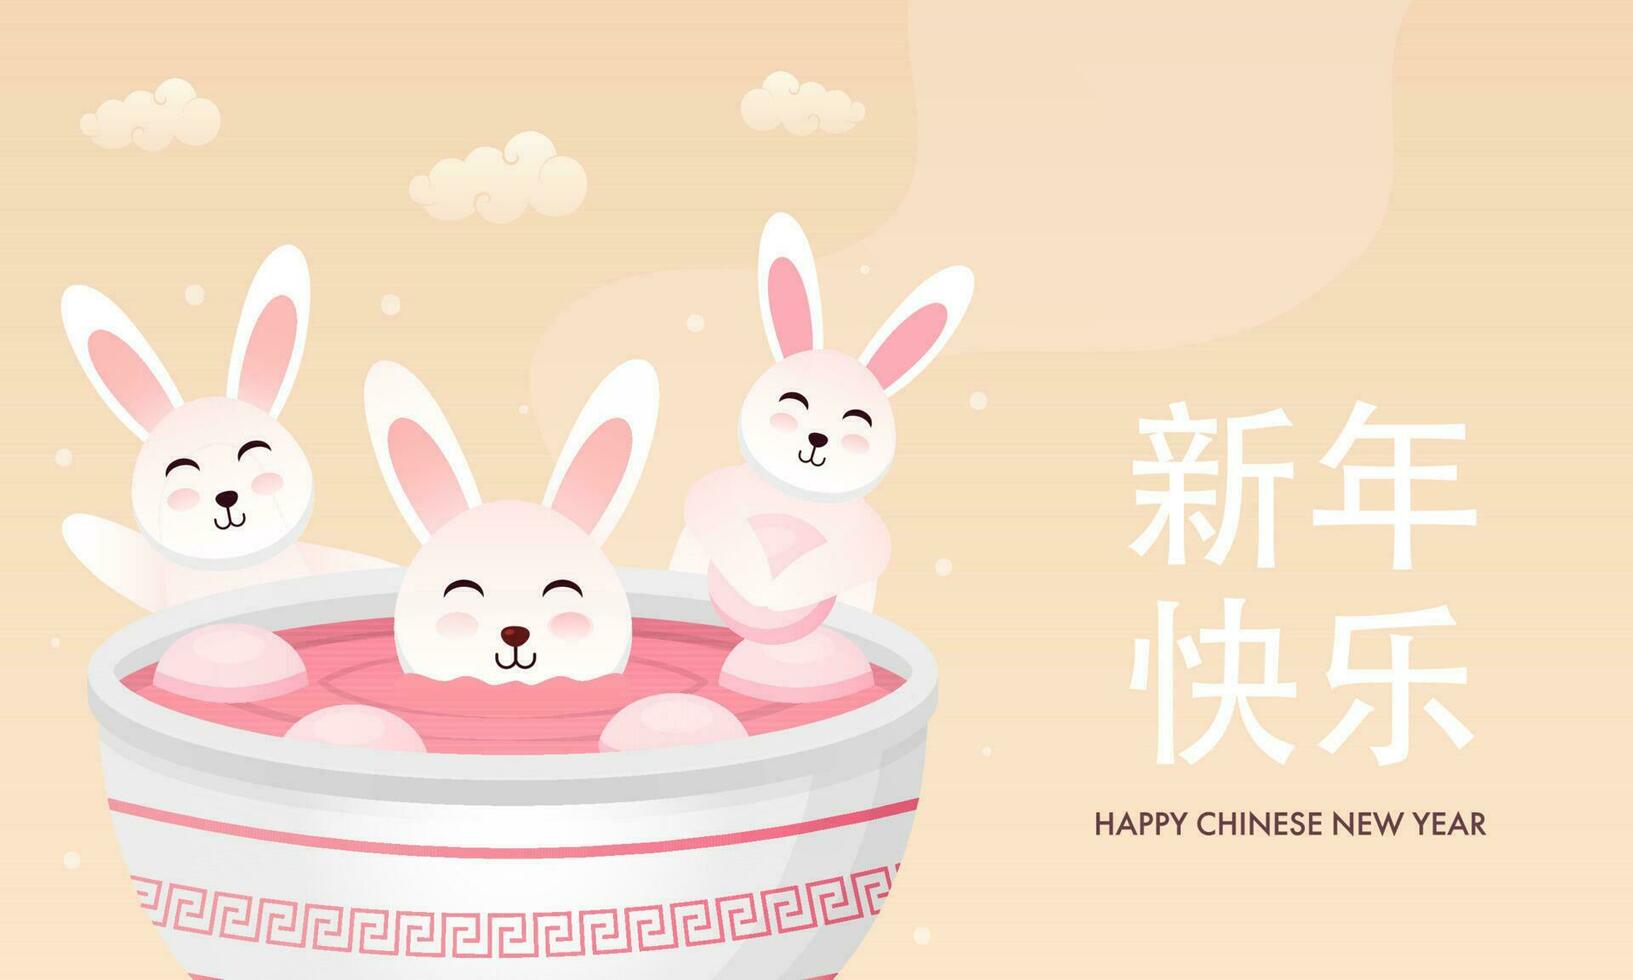 Mandarin Lettering Of Happy Chinese New Year With Cartoon Bunnies Enjoying Tangyuan Dish On Peachpuff Background. vector